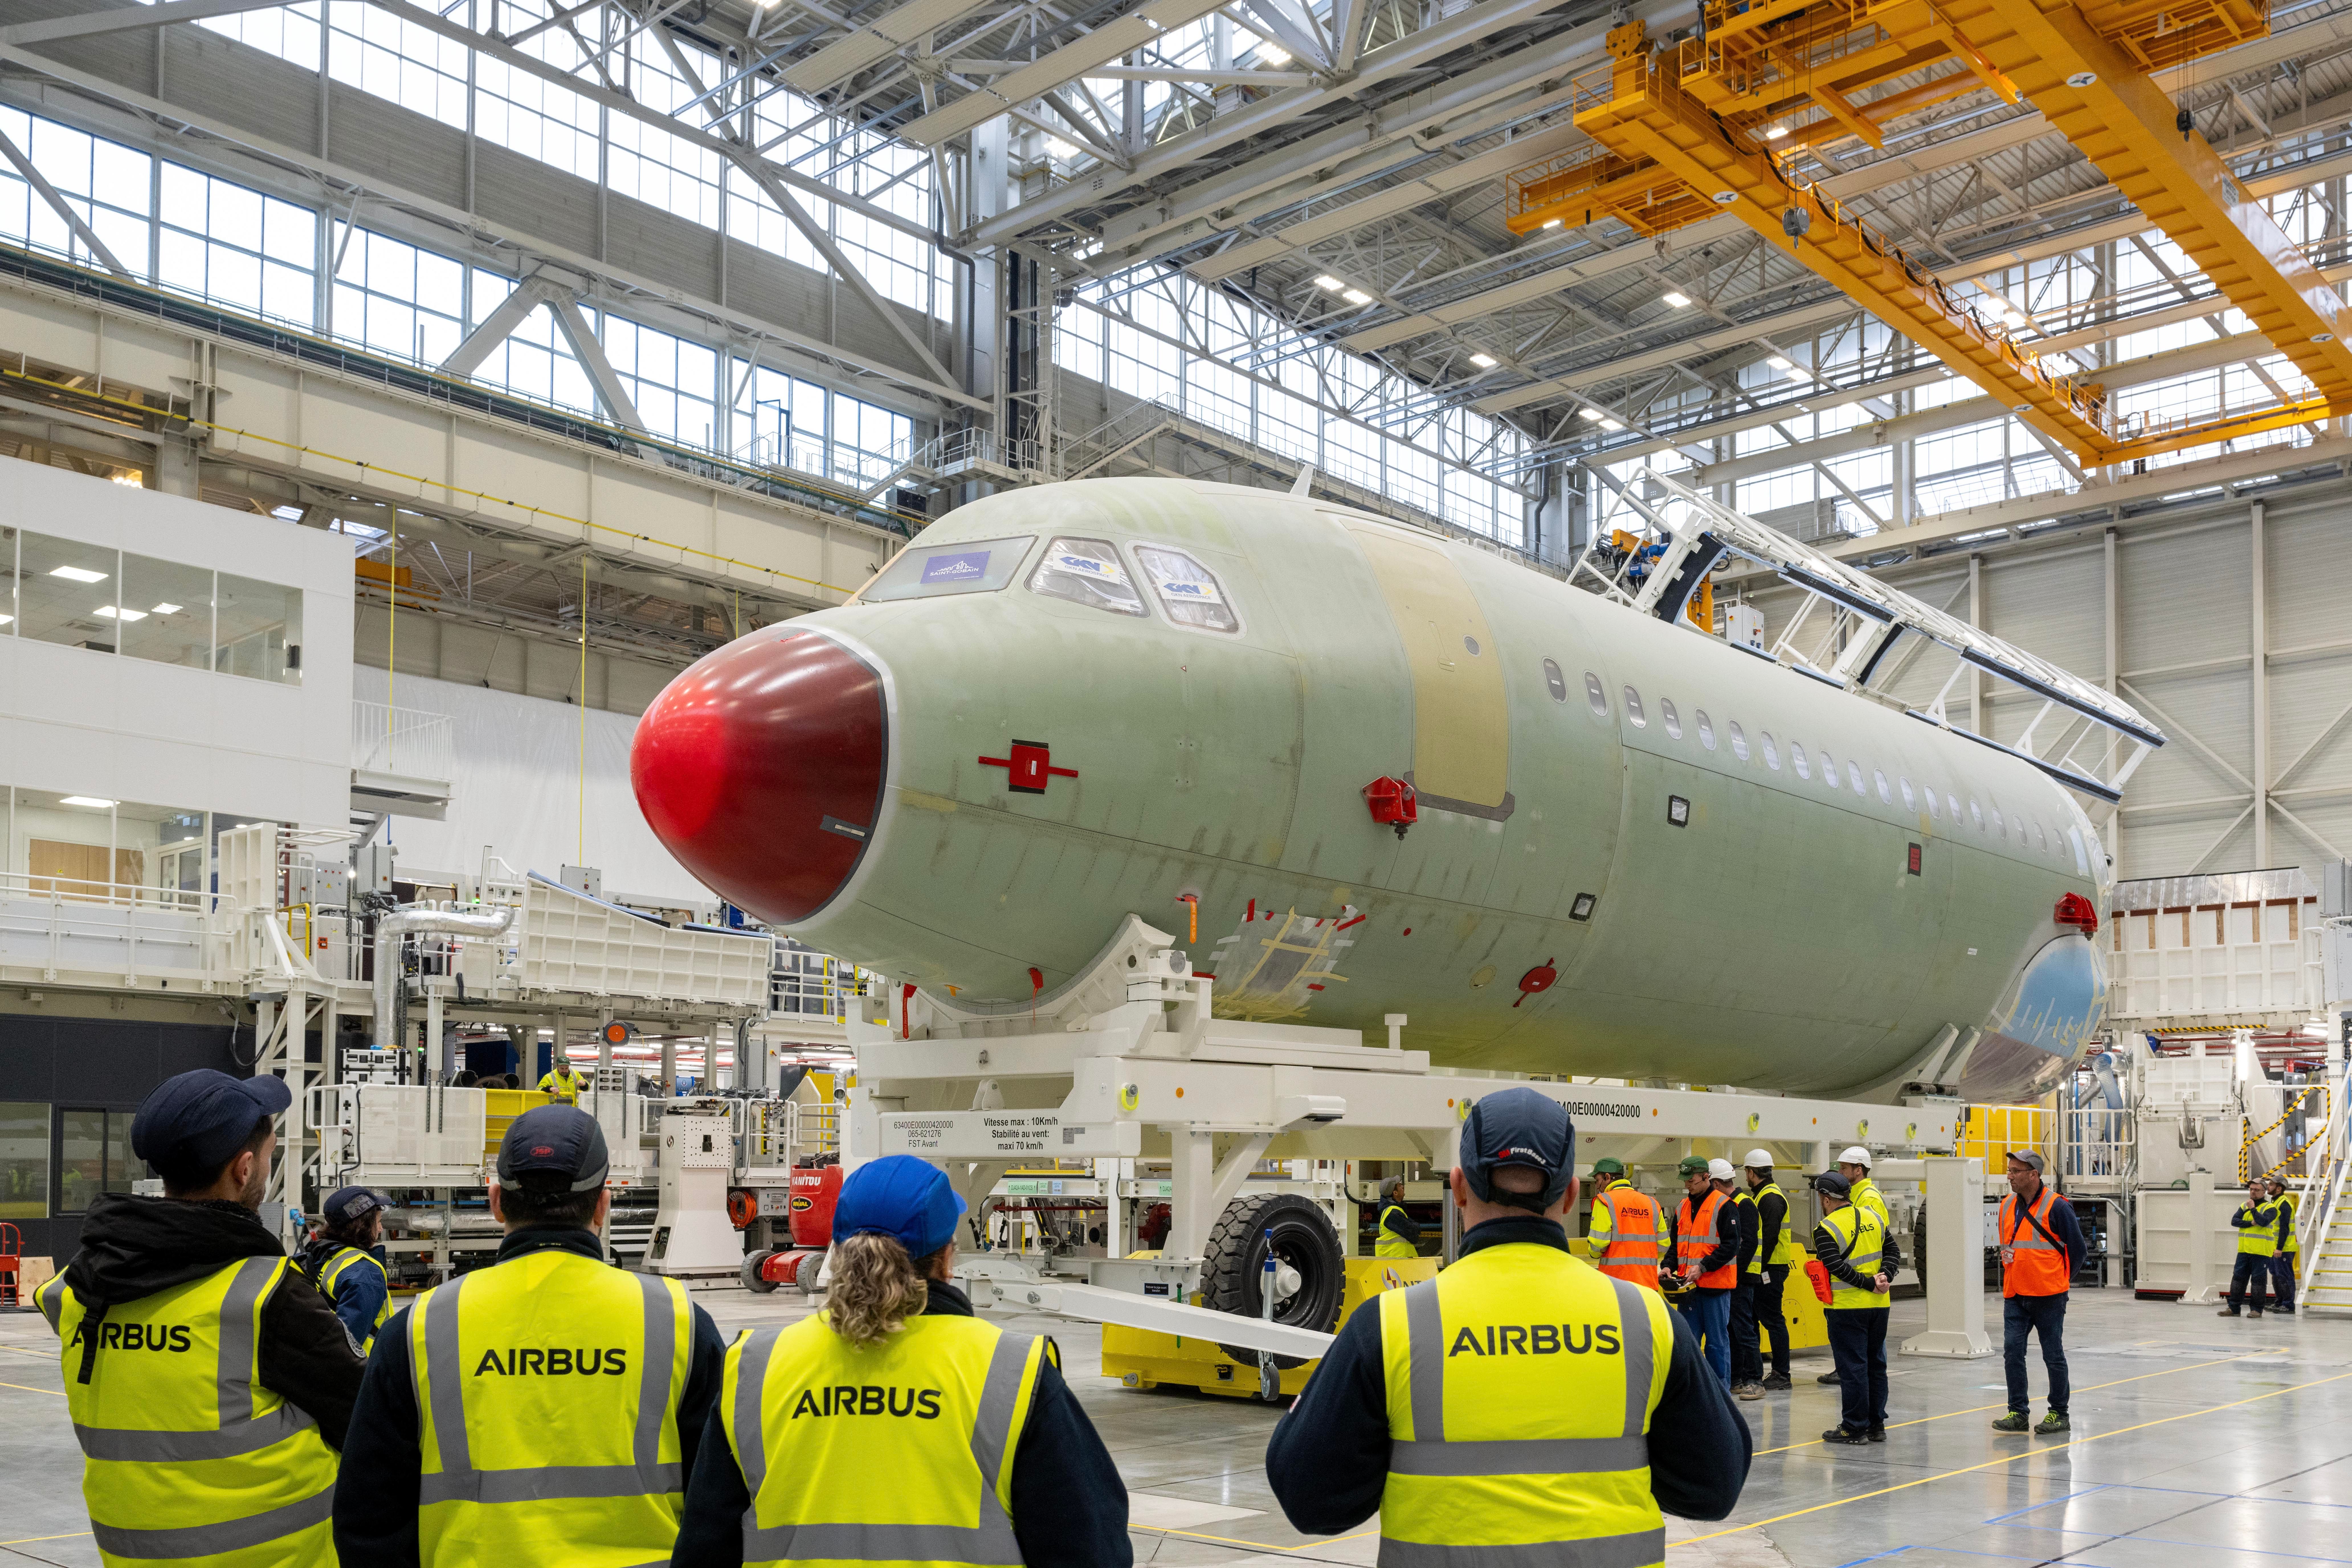 Airbus as opened a new final assembly line